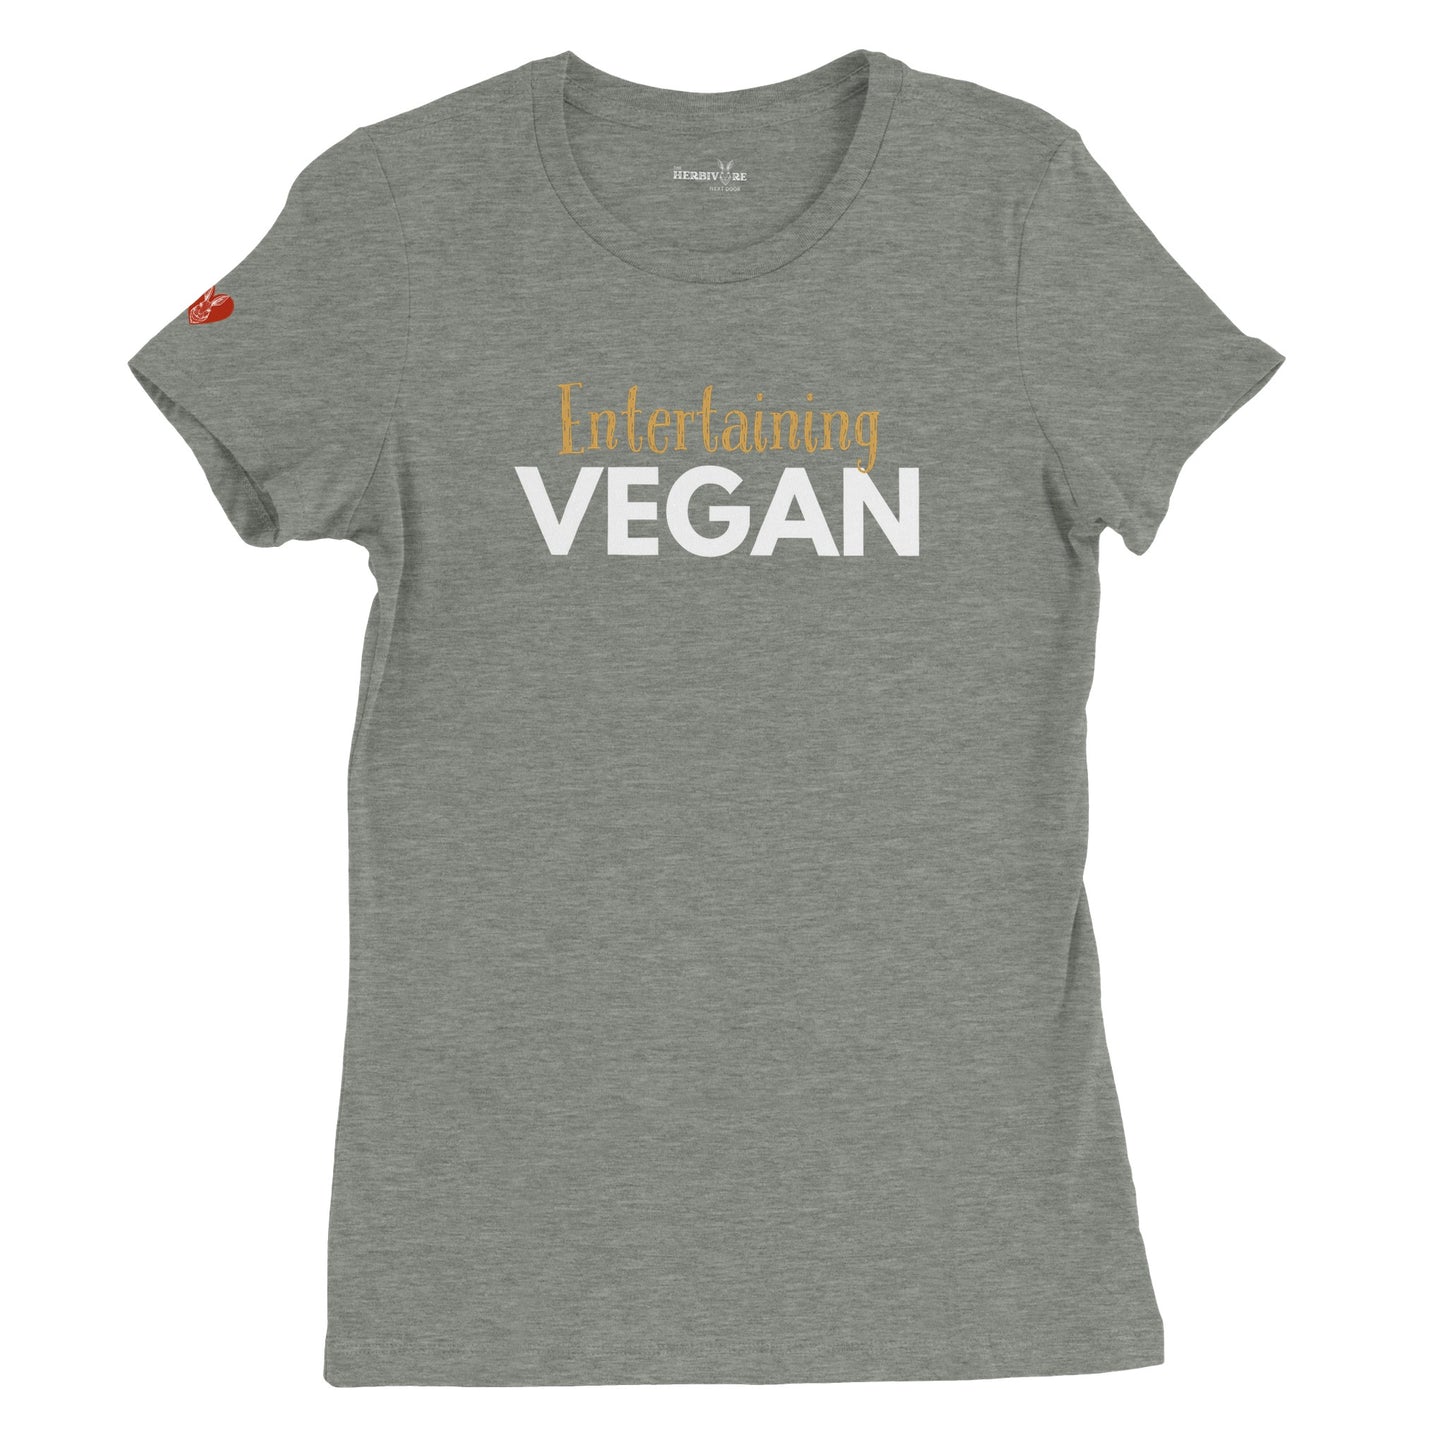 Entertaining Vegan - Women's Style (Women's run small - get one size up from normal unisex)